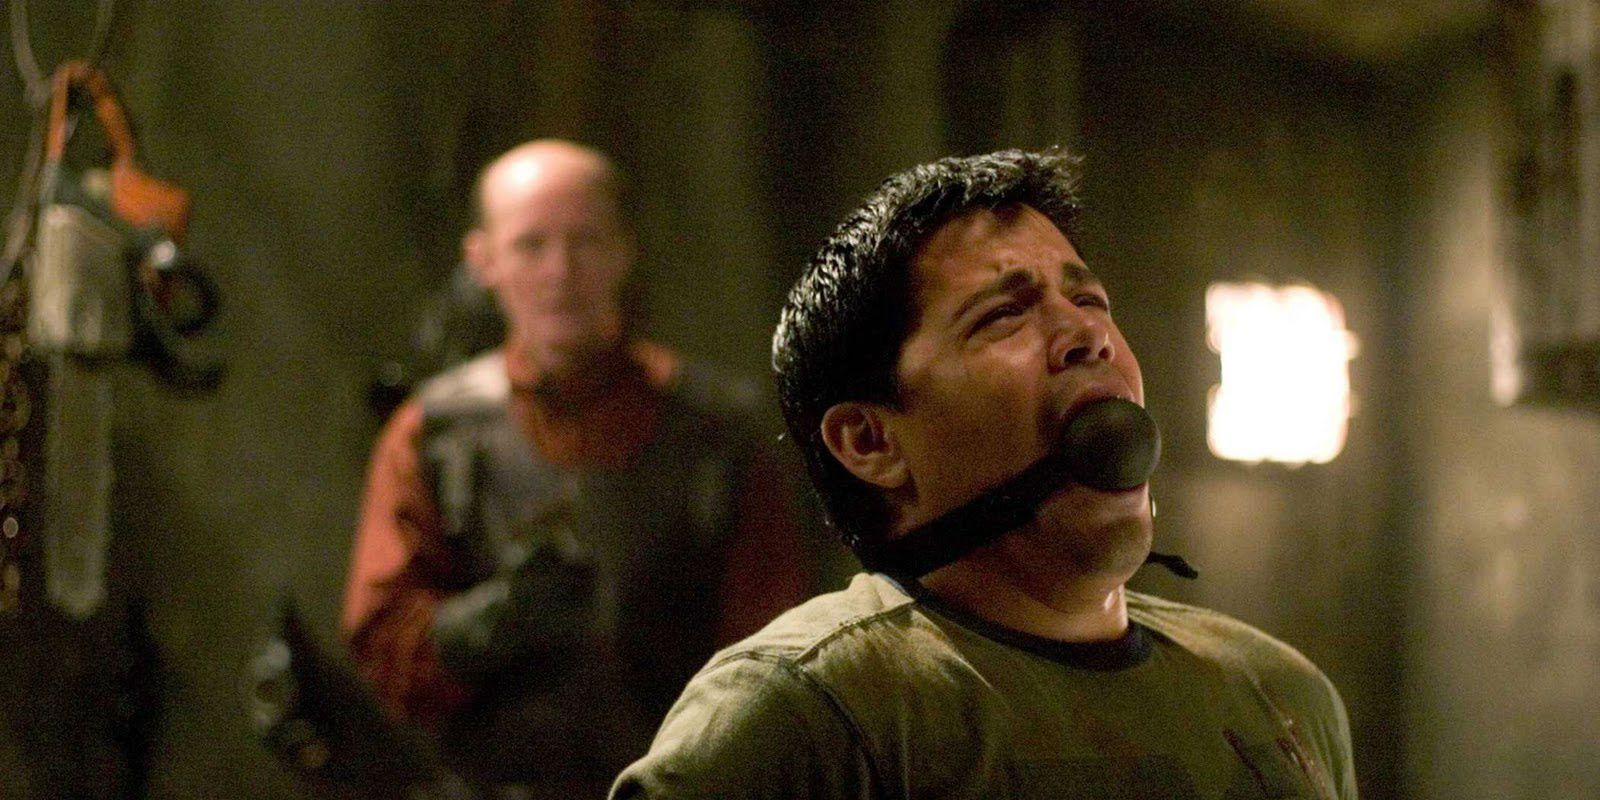 Jay Hernandez with a ball gag in his mouth as an apron-wearing figure stands behind him in Hostel.